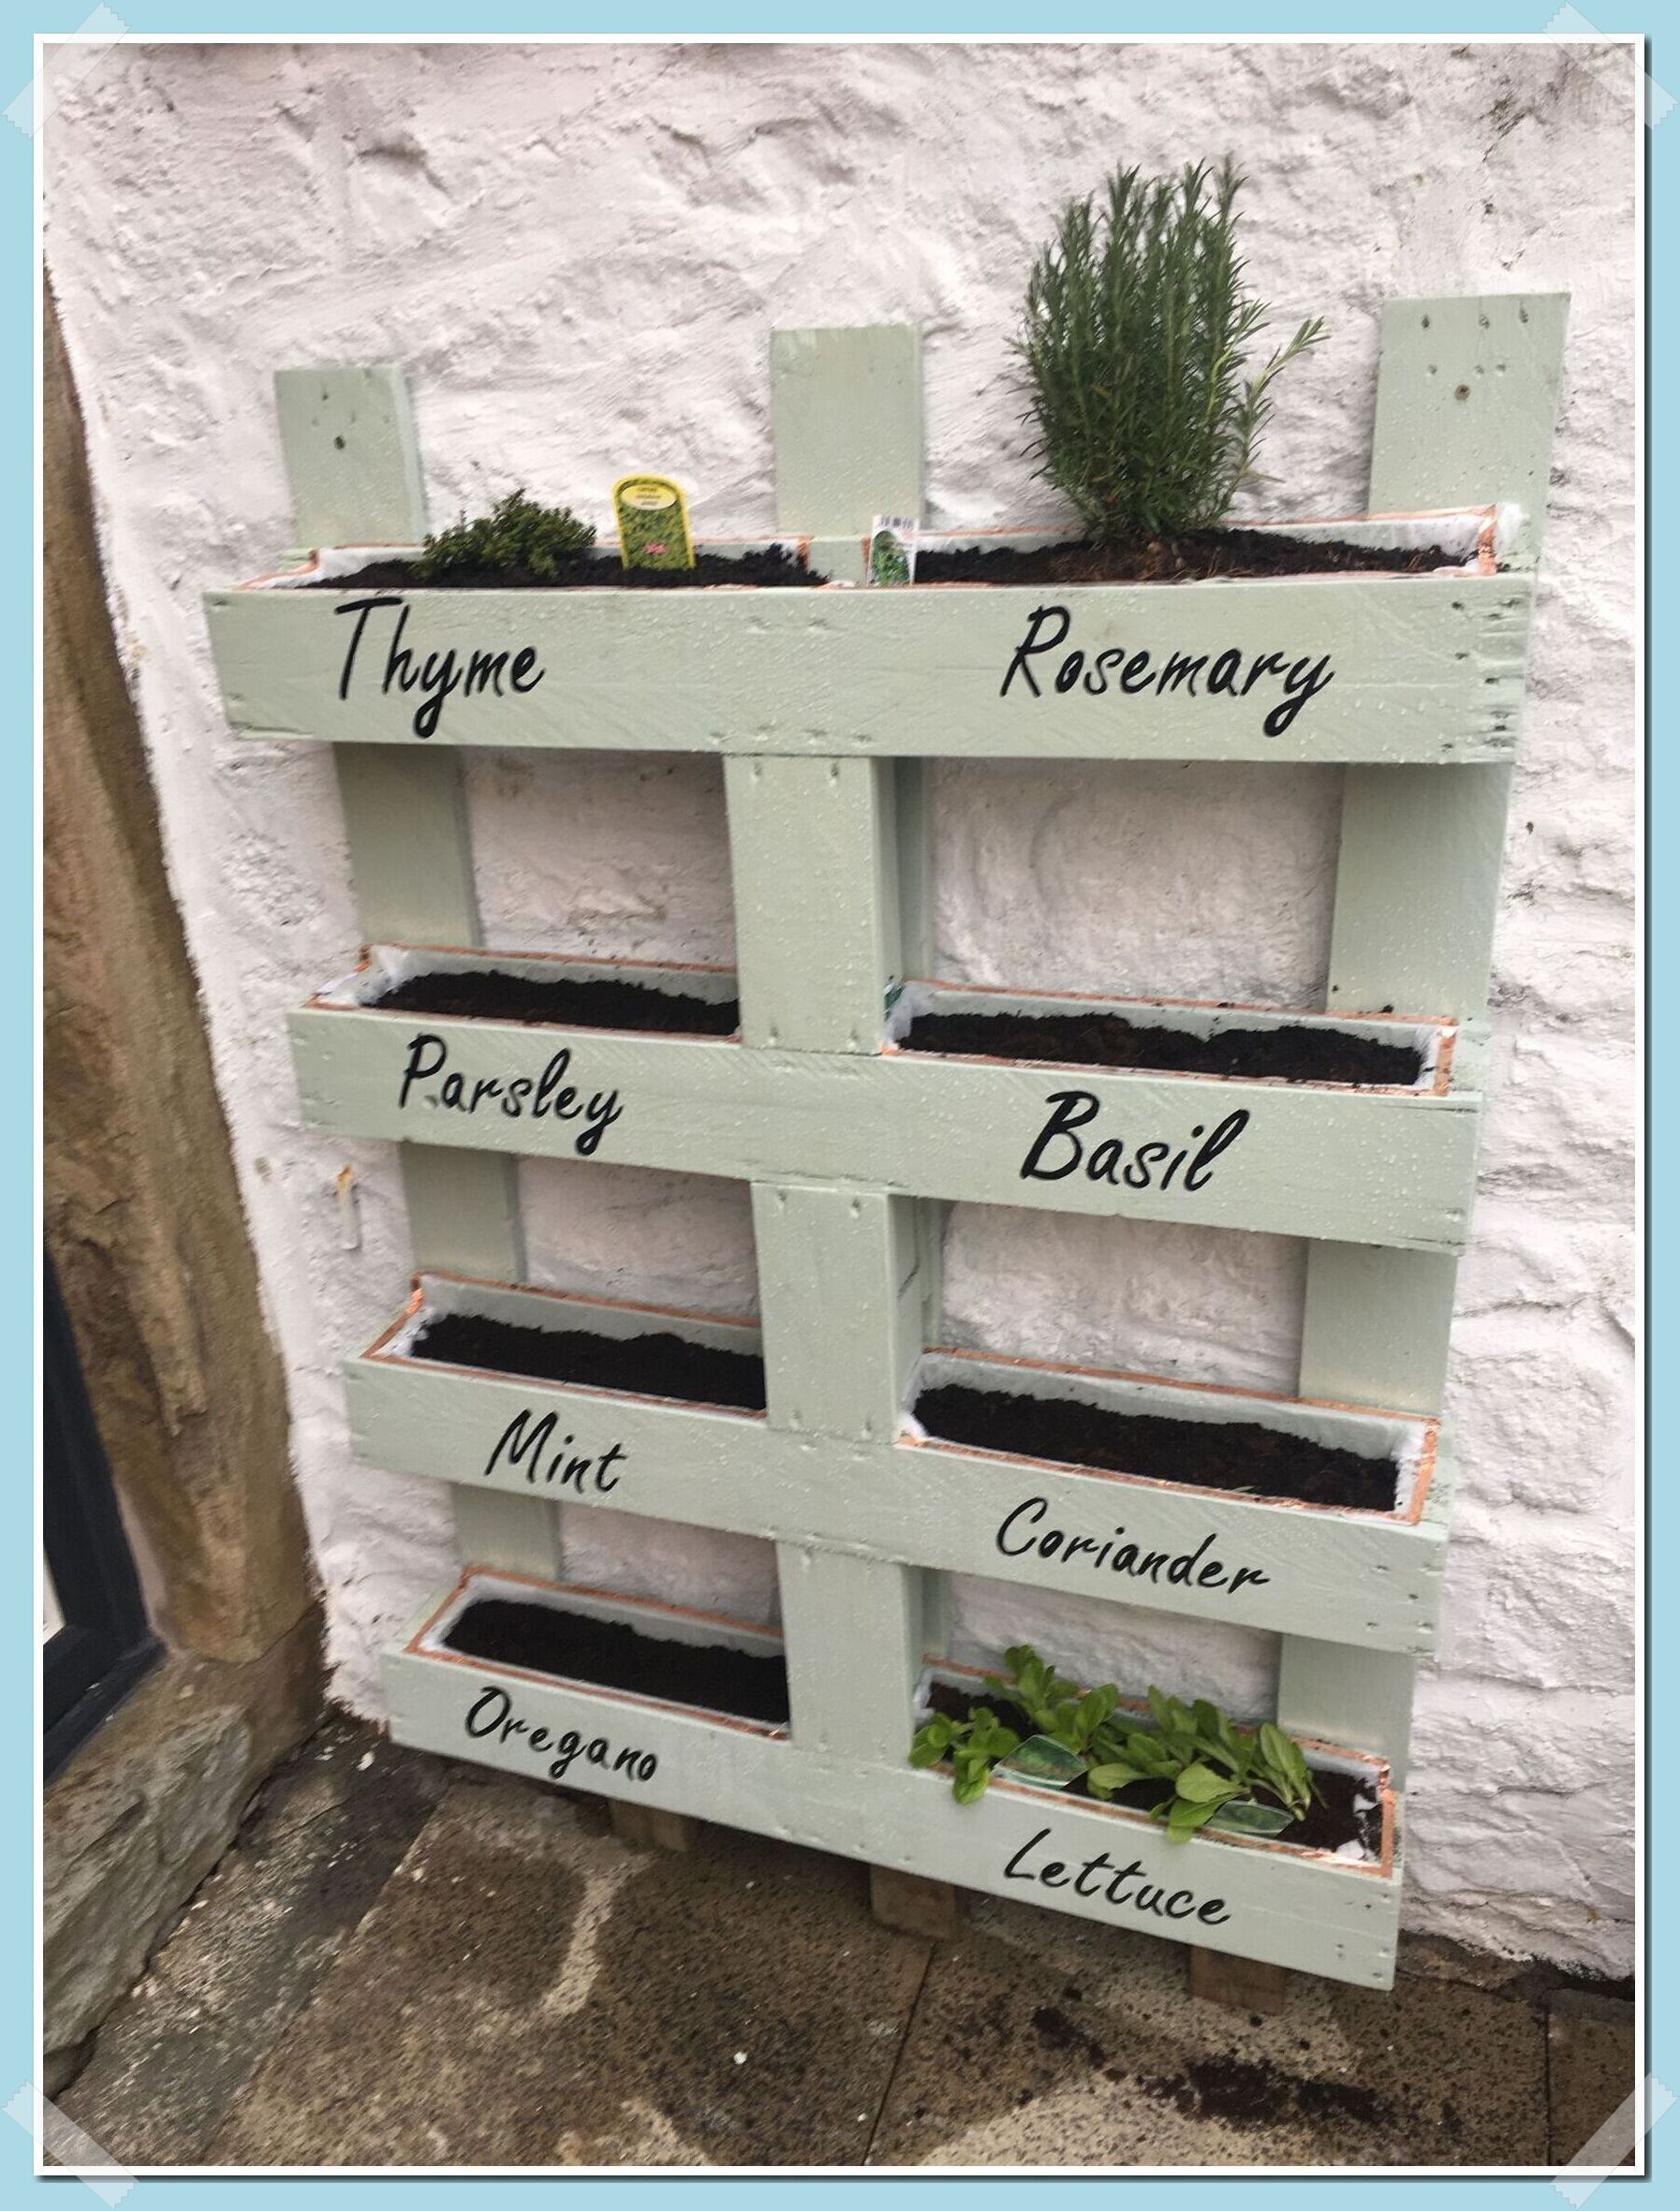 Creative Ways to Create Your Own Herb Garden Planter from Everyday Items